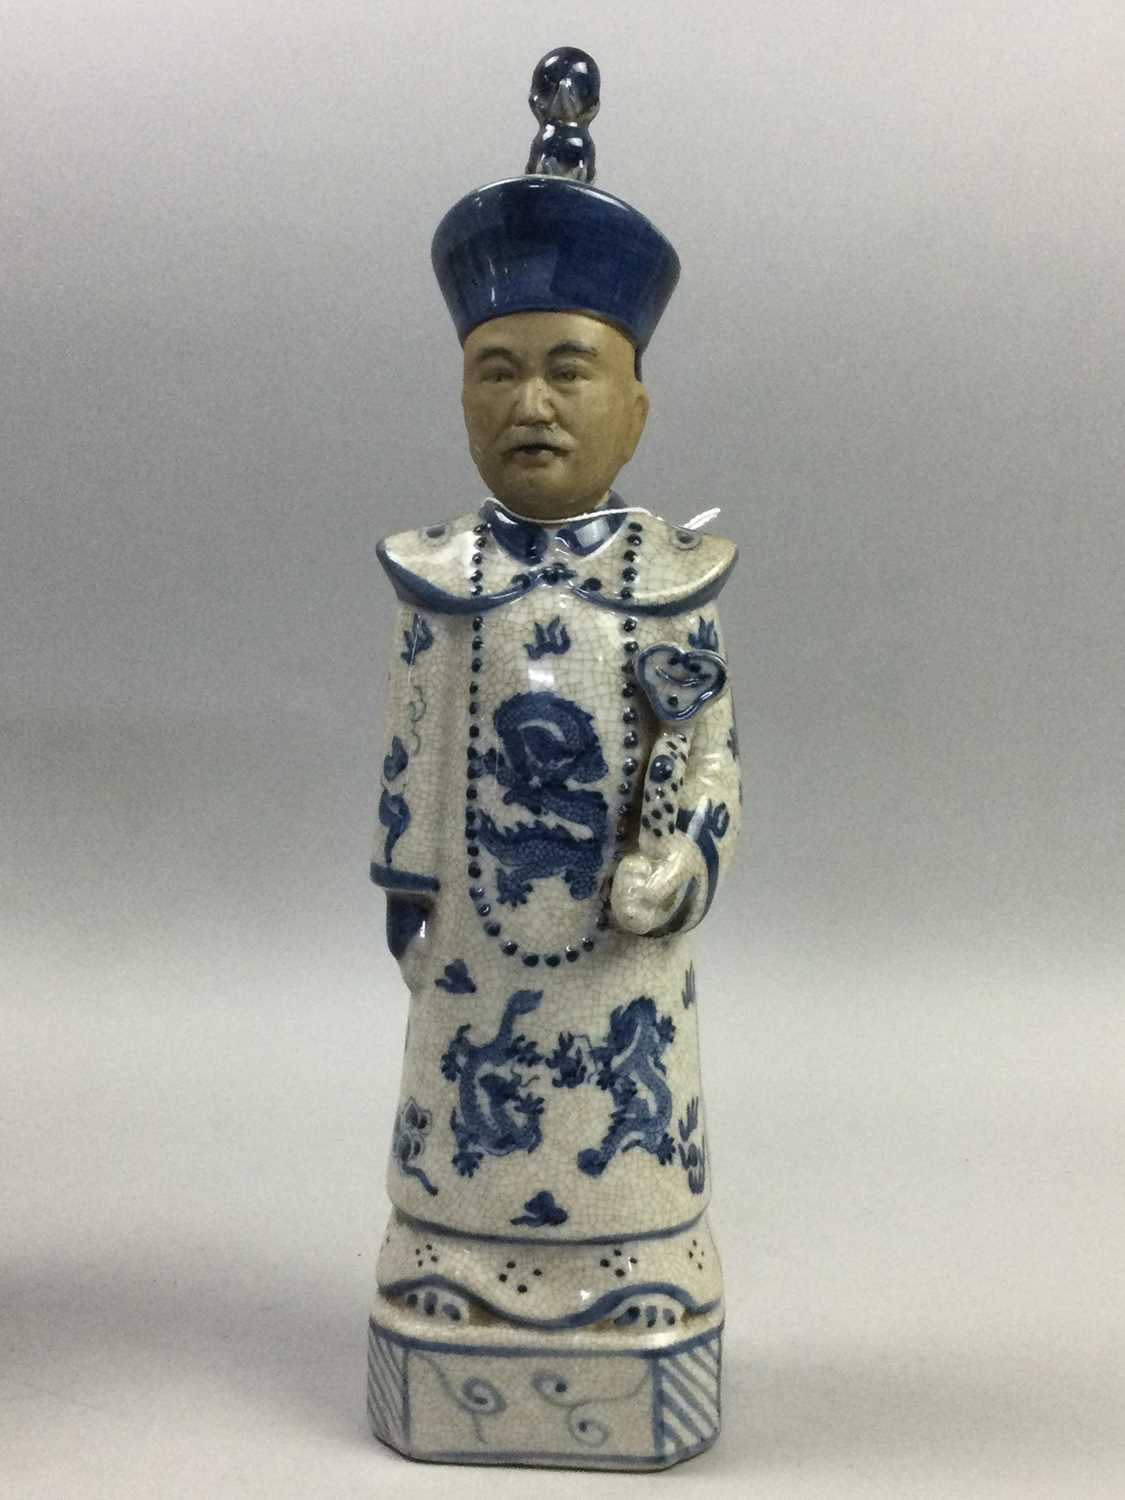 Lot 70 - A CHINESE CERAMIC FIGURE OF AN OFFICIAL AND TWO CHINESE VASES